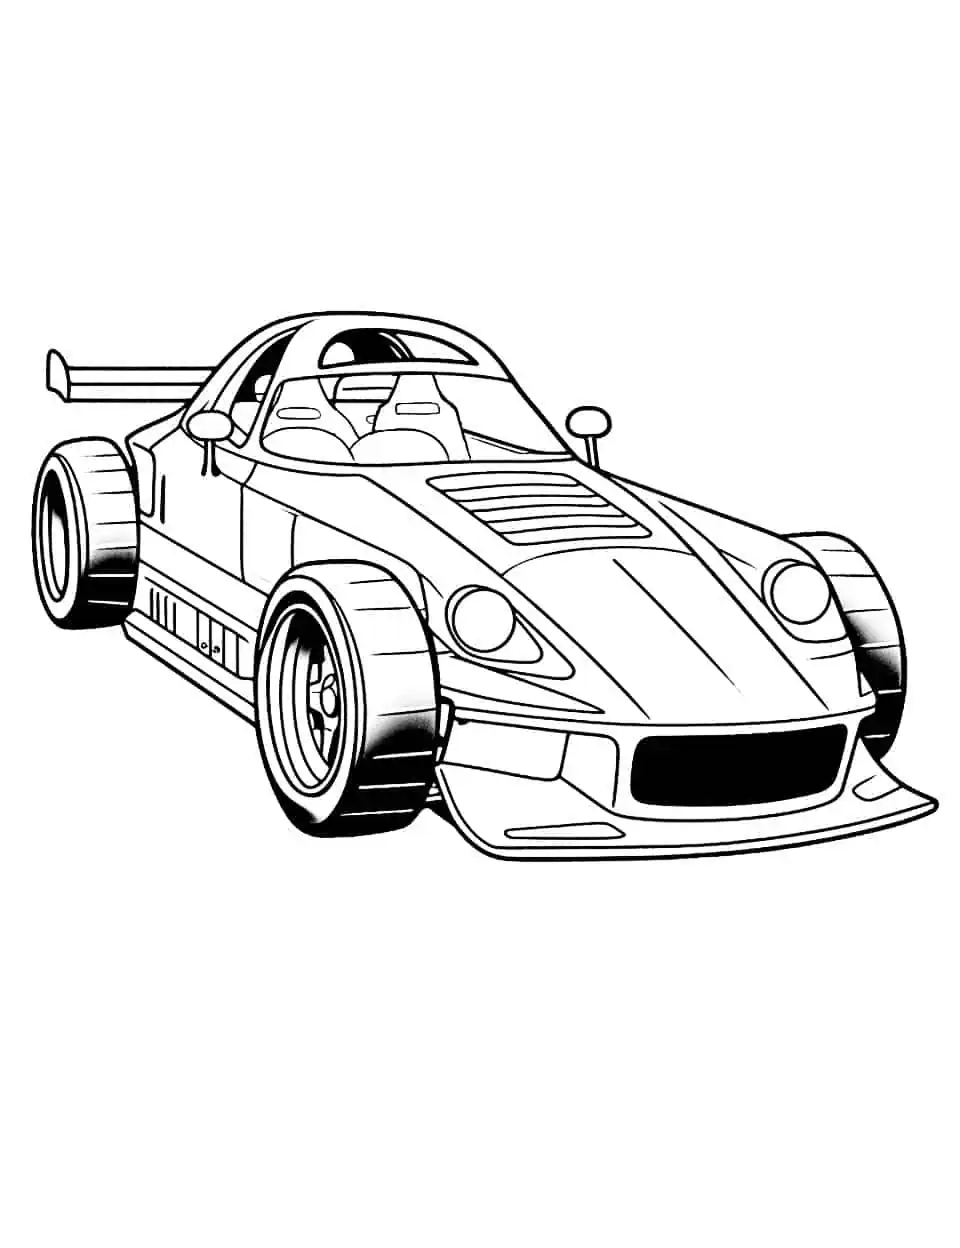 The Detailed Racer Car Coloring Page - A detailed image of a race car for older kids who enjoy intricate coloring.